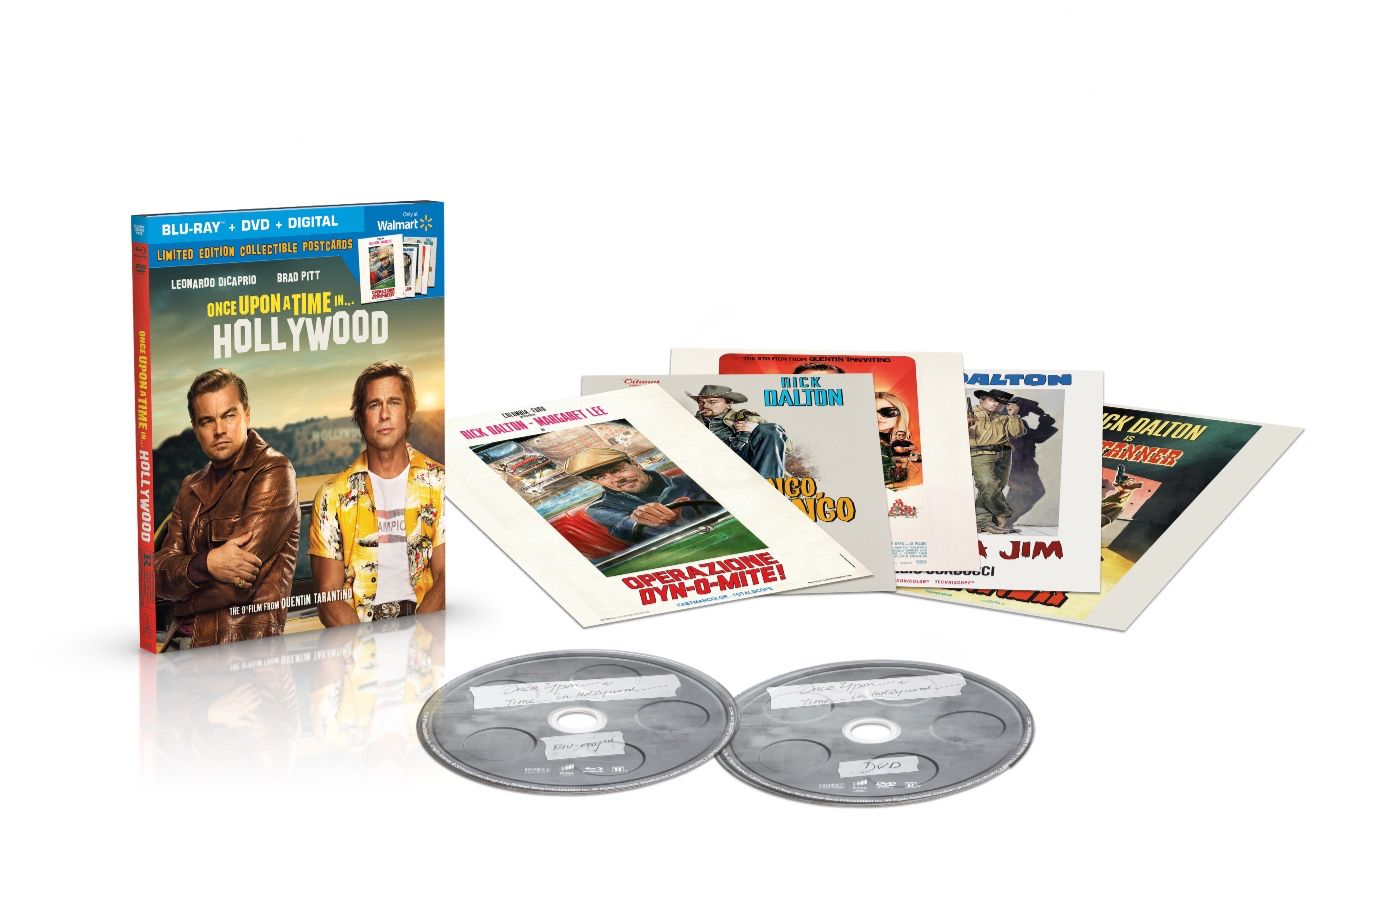 Once Upon a Time in Hollywood Walmart Blu-ray